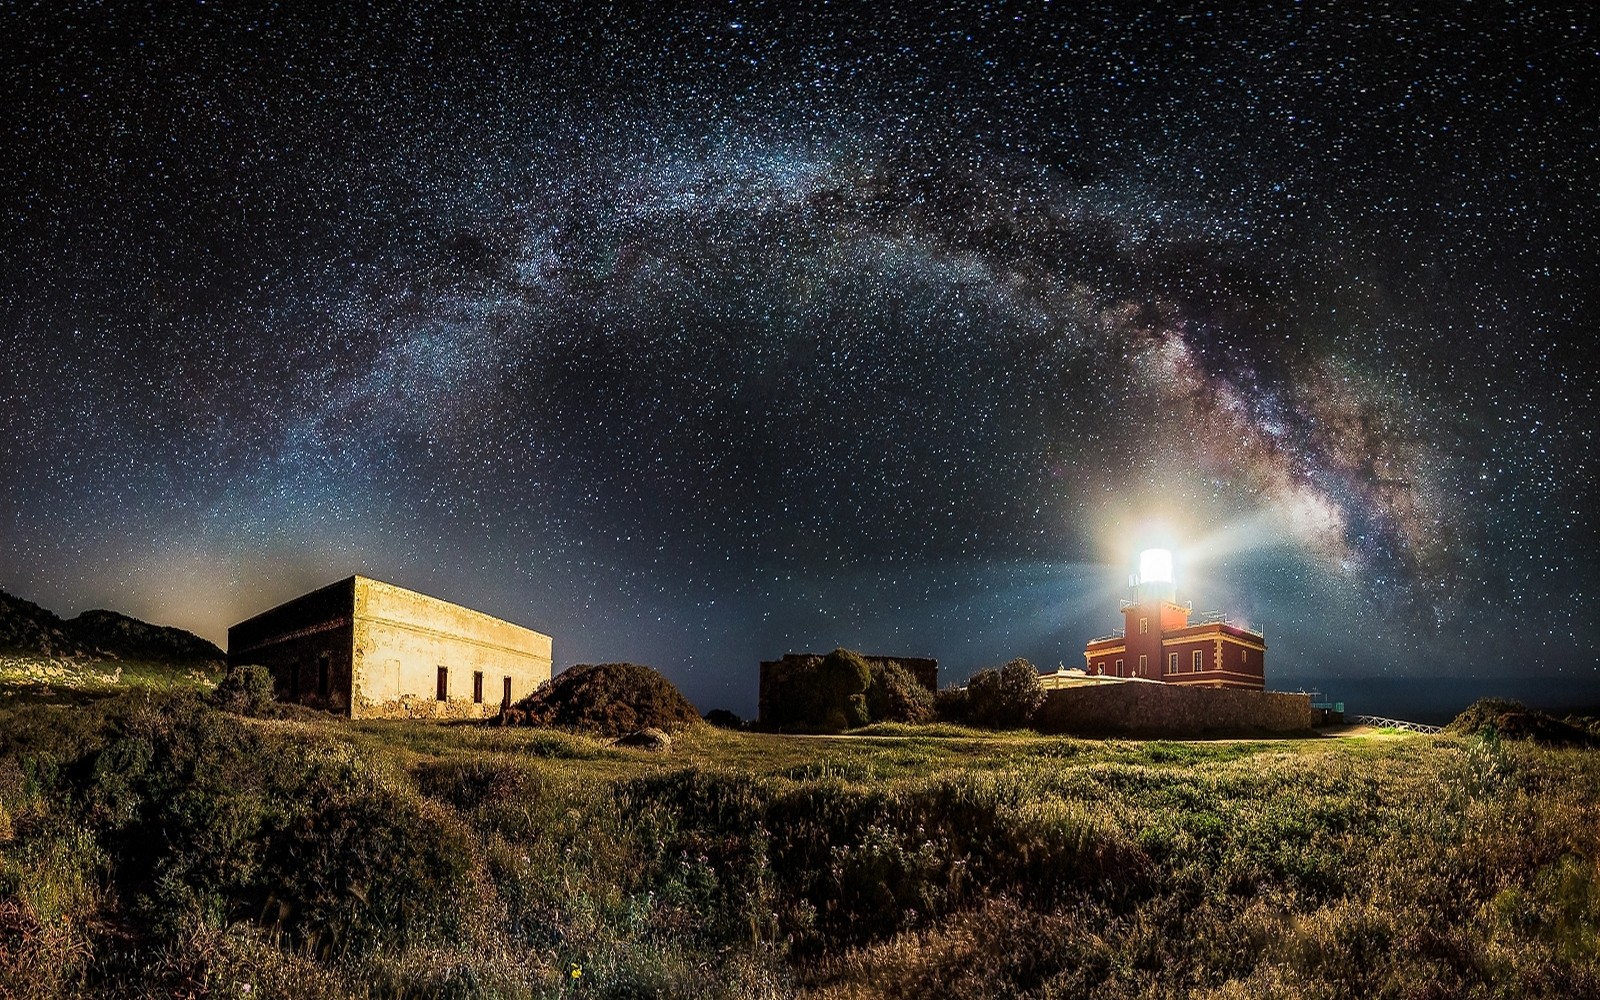 General 1600x1000 nature landscape lighthouse Milky Way starry night space universe galaxy grass shrubs long exposure